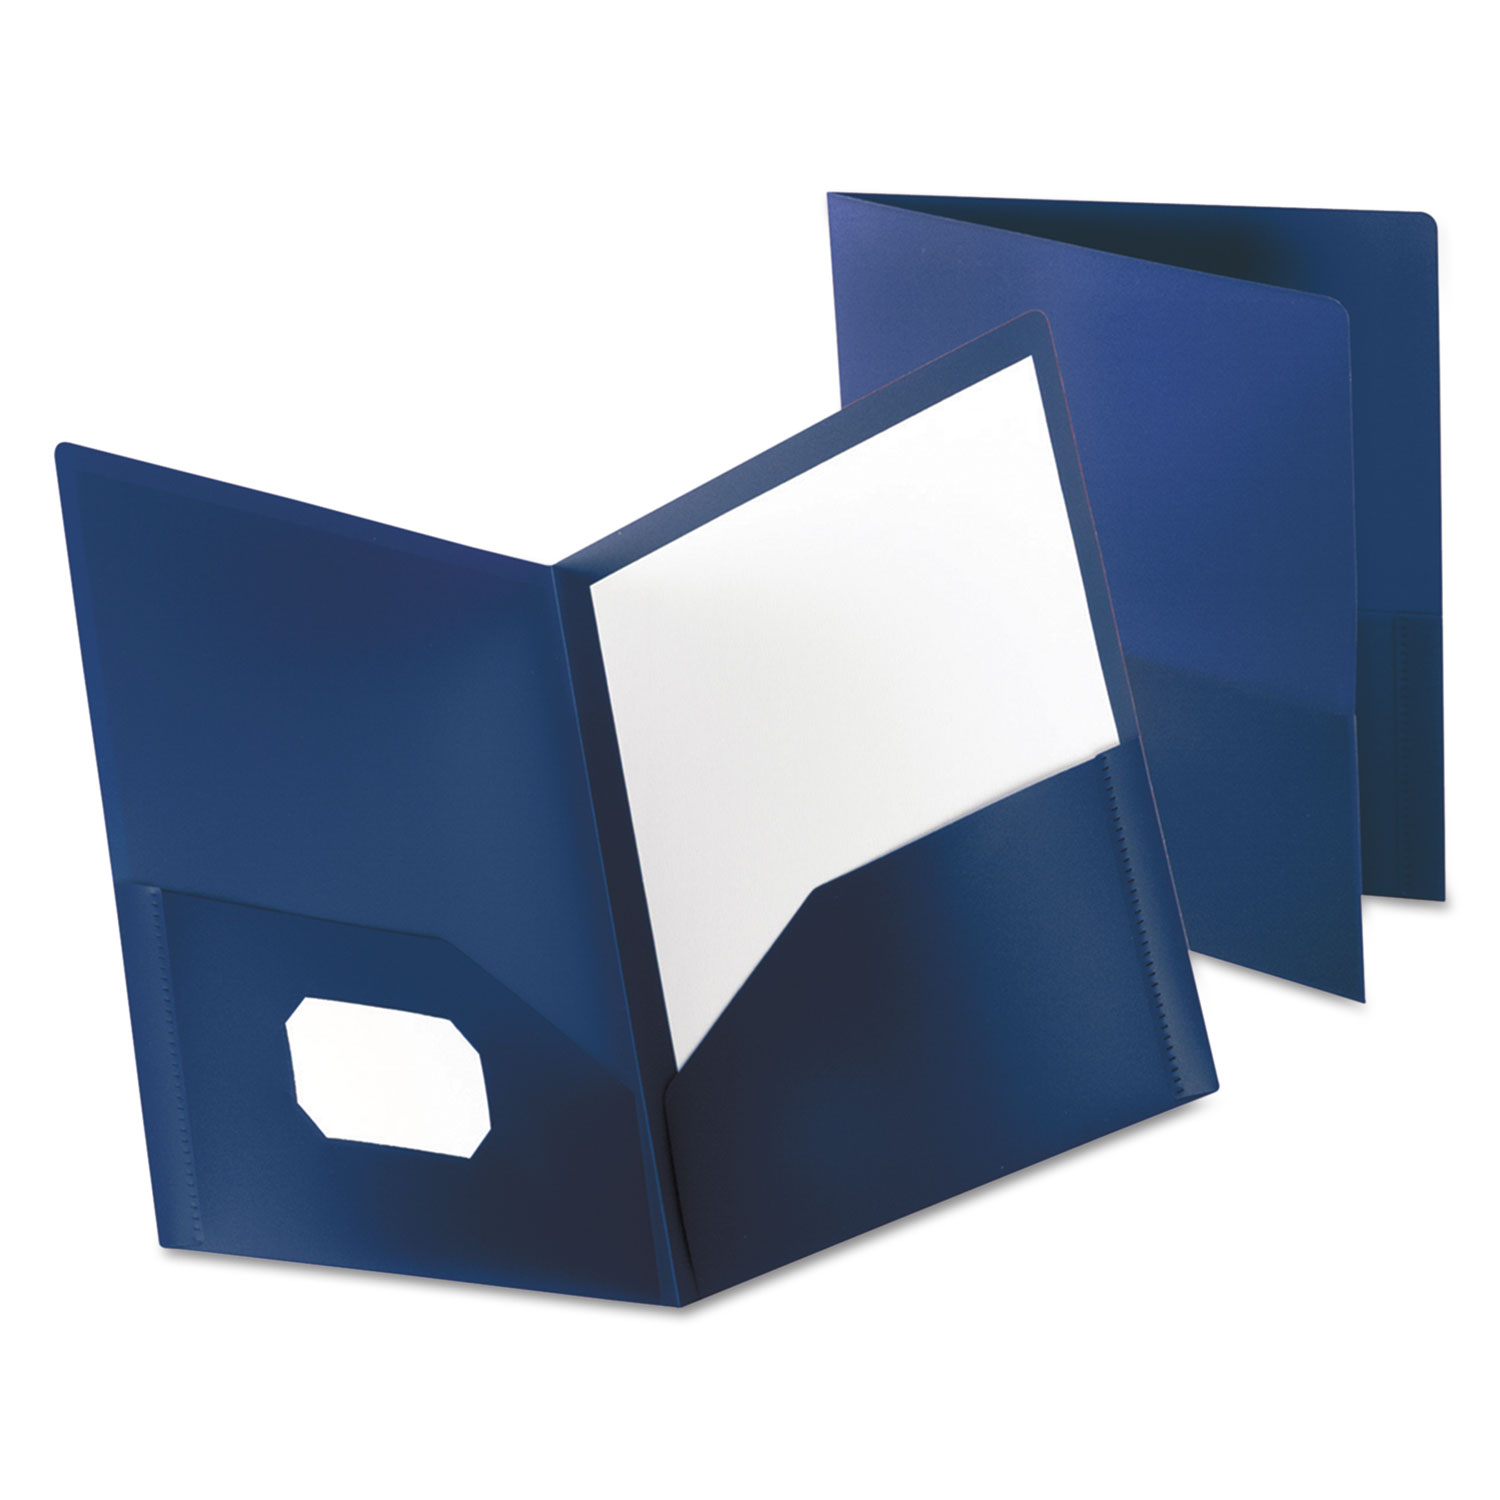  Oxford 57402EE Poly Twin-Pocket Folder, Holds 100 Sheets, Opaque Dark Blue (OXF57402) 